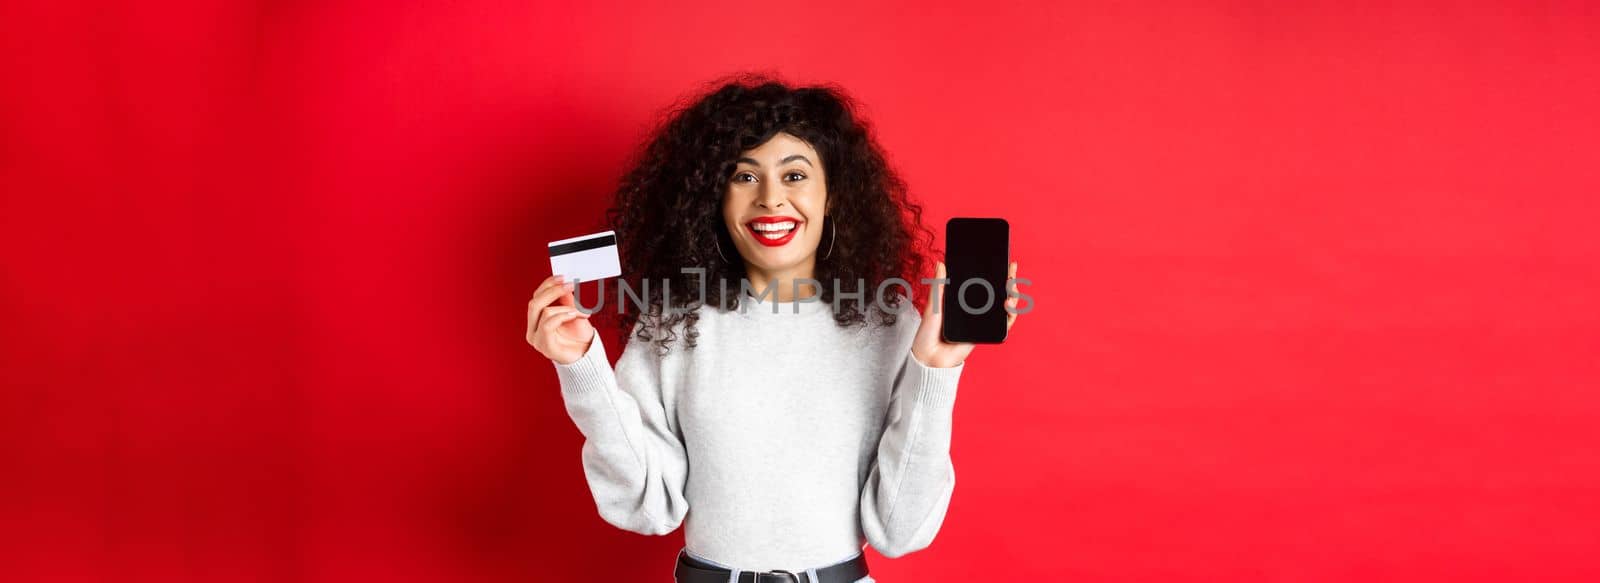 E-commerce and online shopping concept. Cheerful woman smiling, showing plastic credit card and empty smartphone screen, standing on red background.